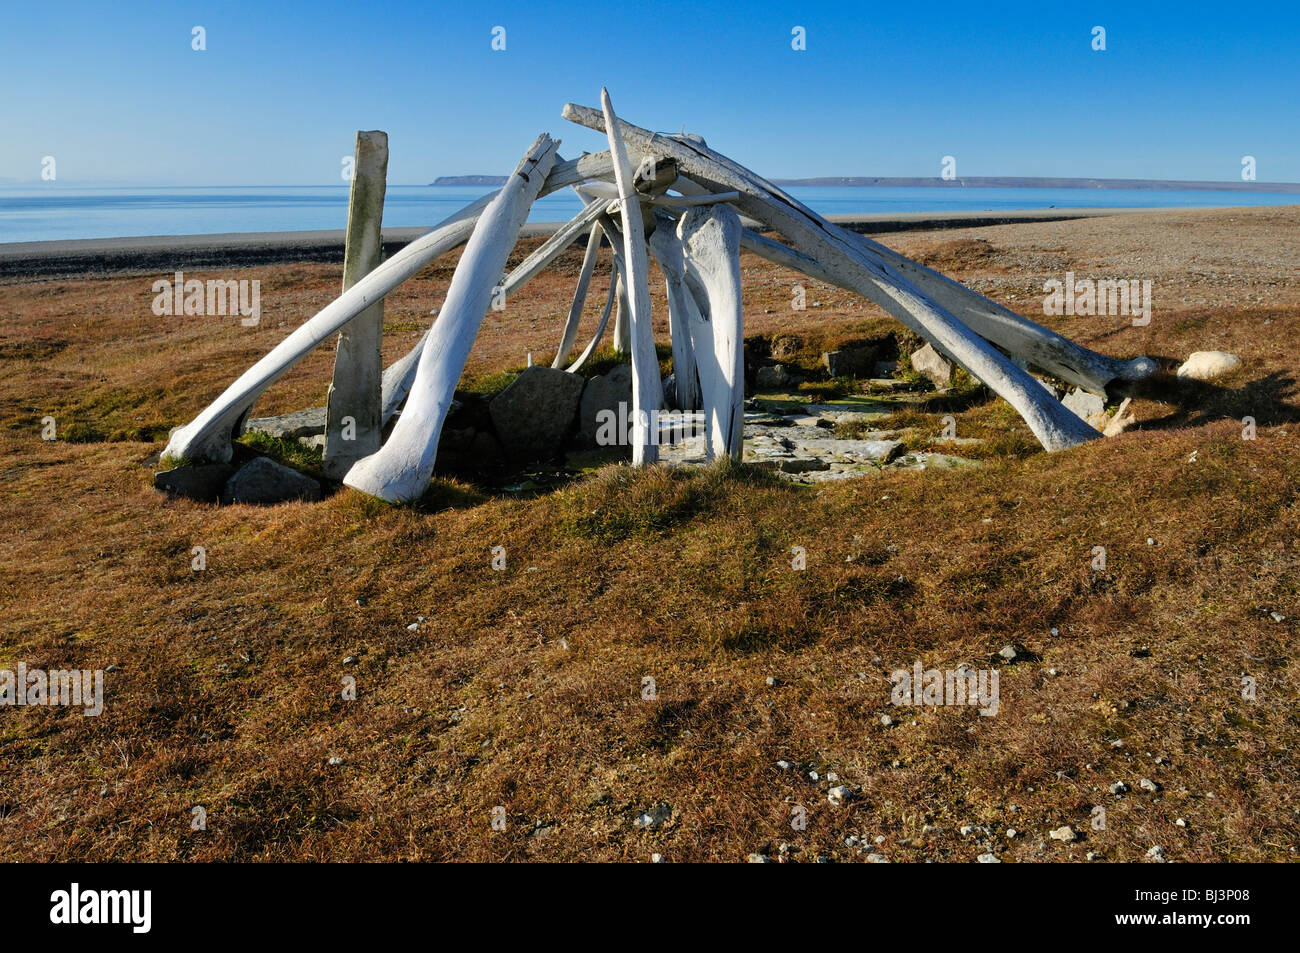 Historic Inuit house from the Thule Culture made out of whale bones, Resolute Bay, Cornwallis Island, Northwest Passage, Nunavu Stock Photo